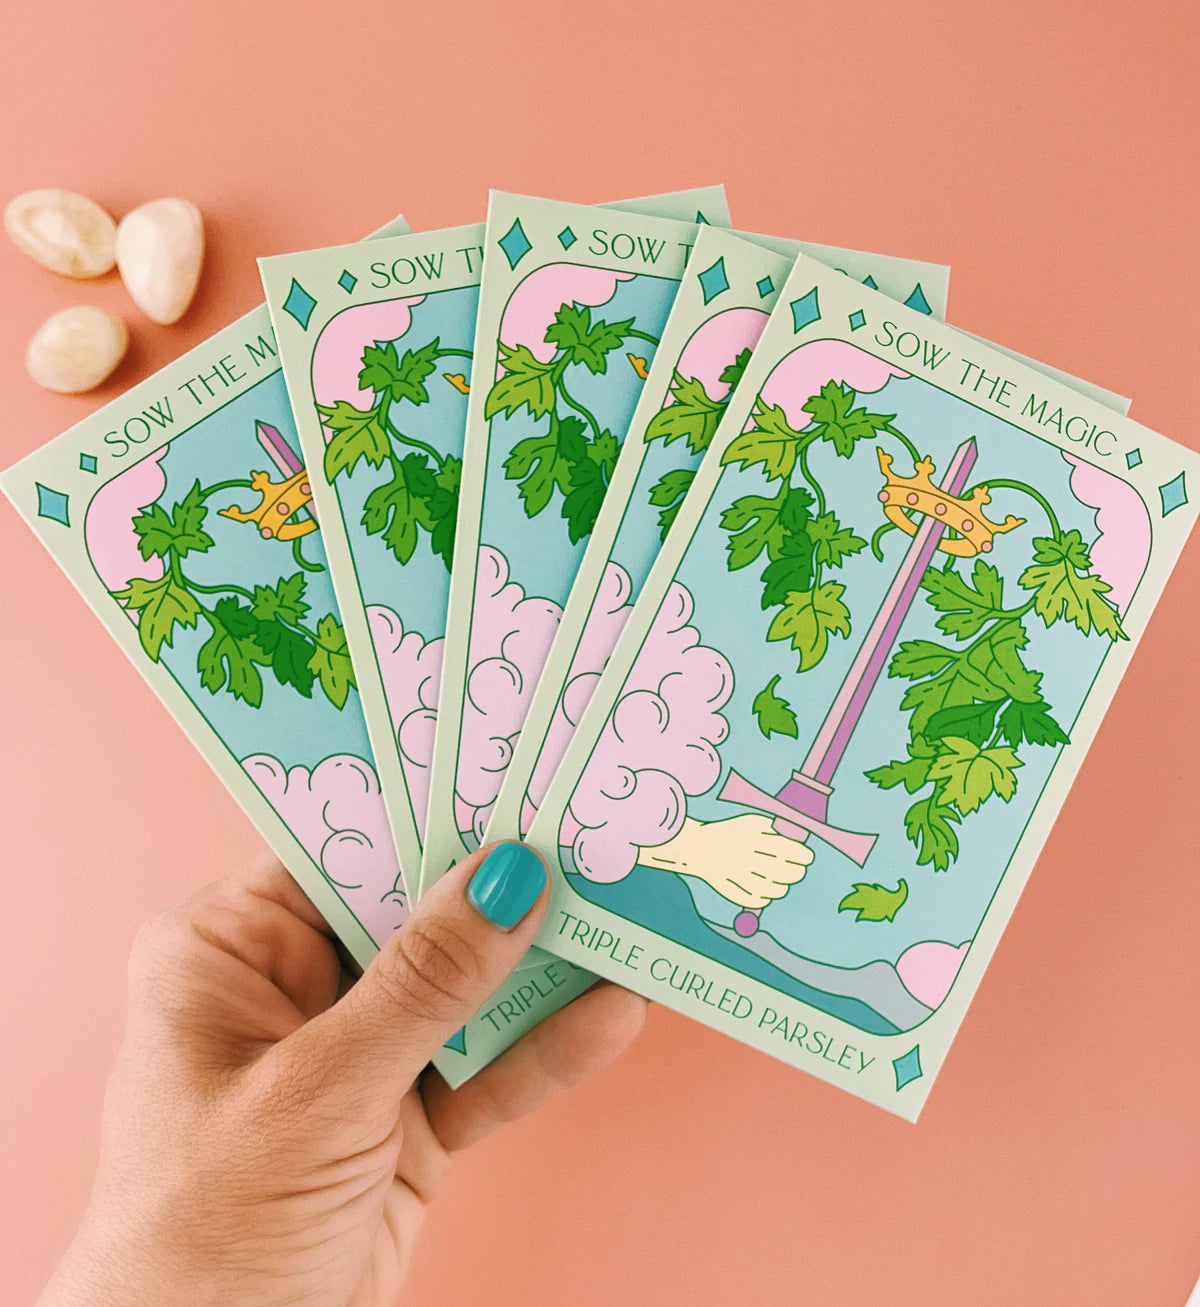 Triple Curled Parsley Tarot Seed Packet